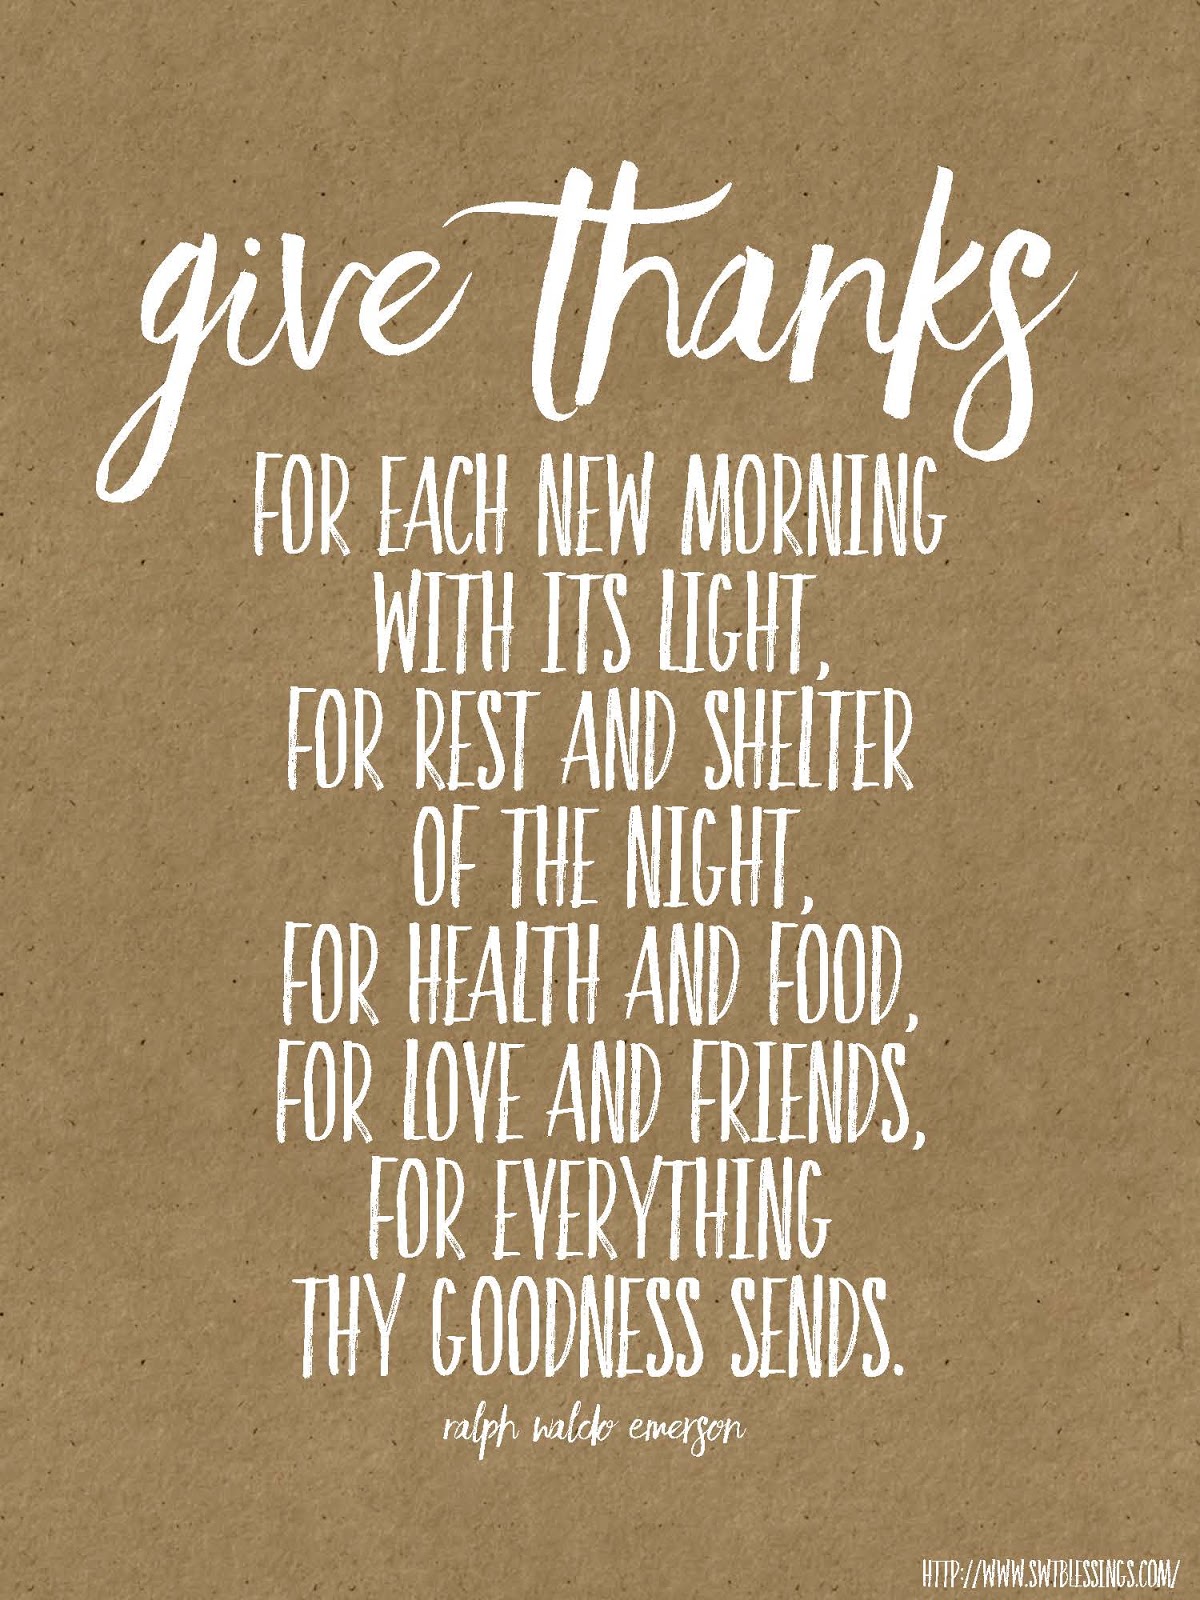 Sweet Blessings: Give Thanks